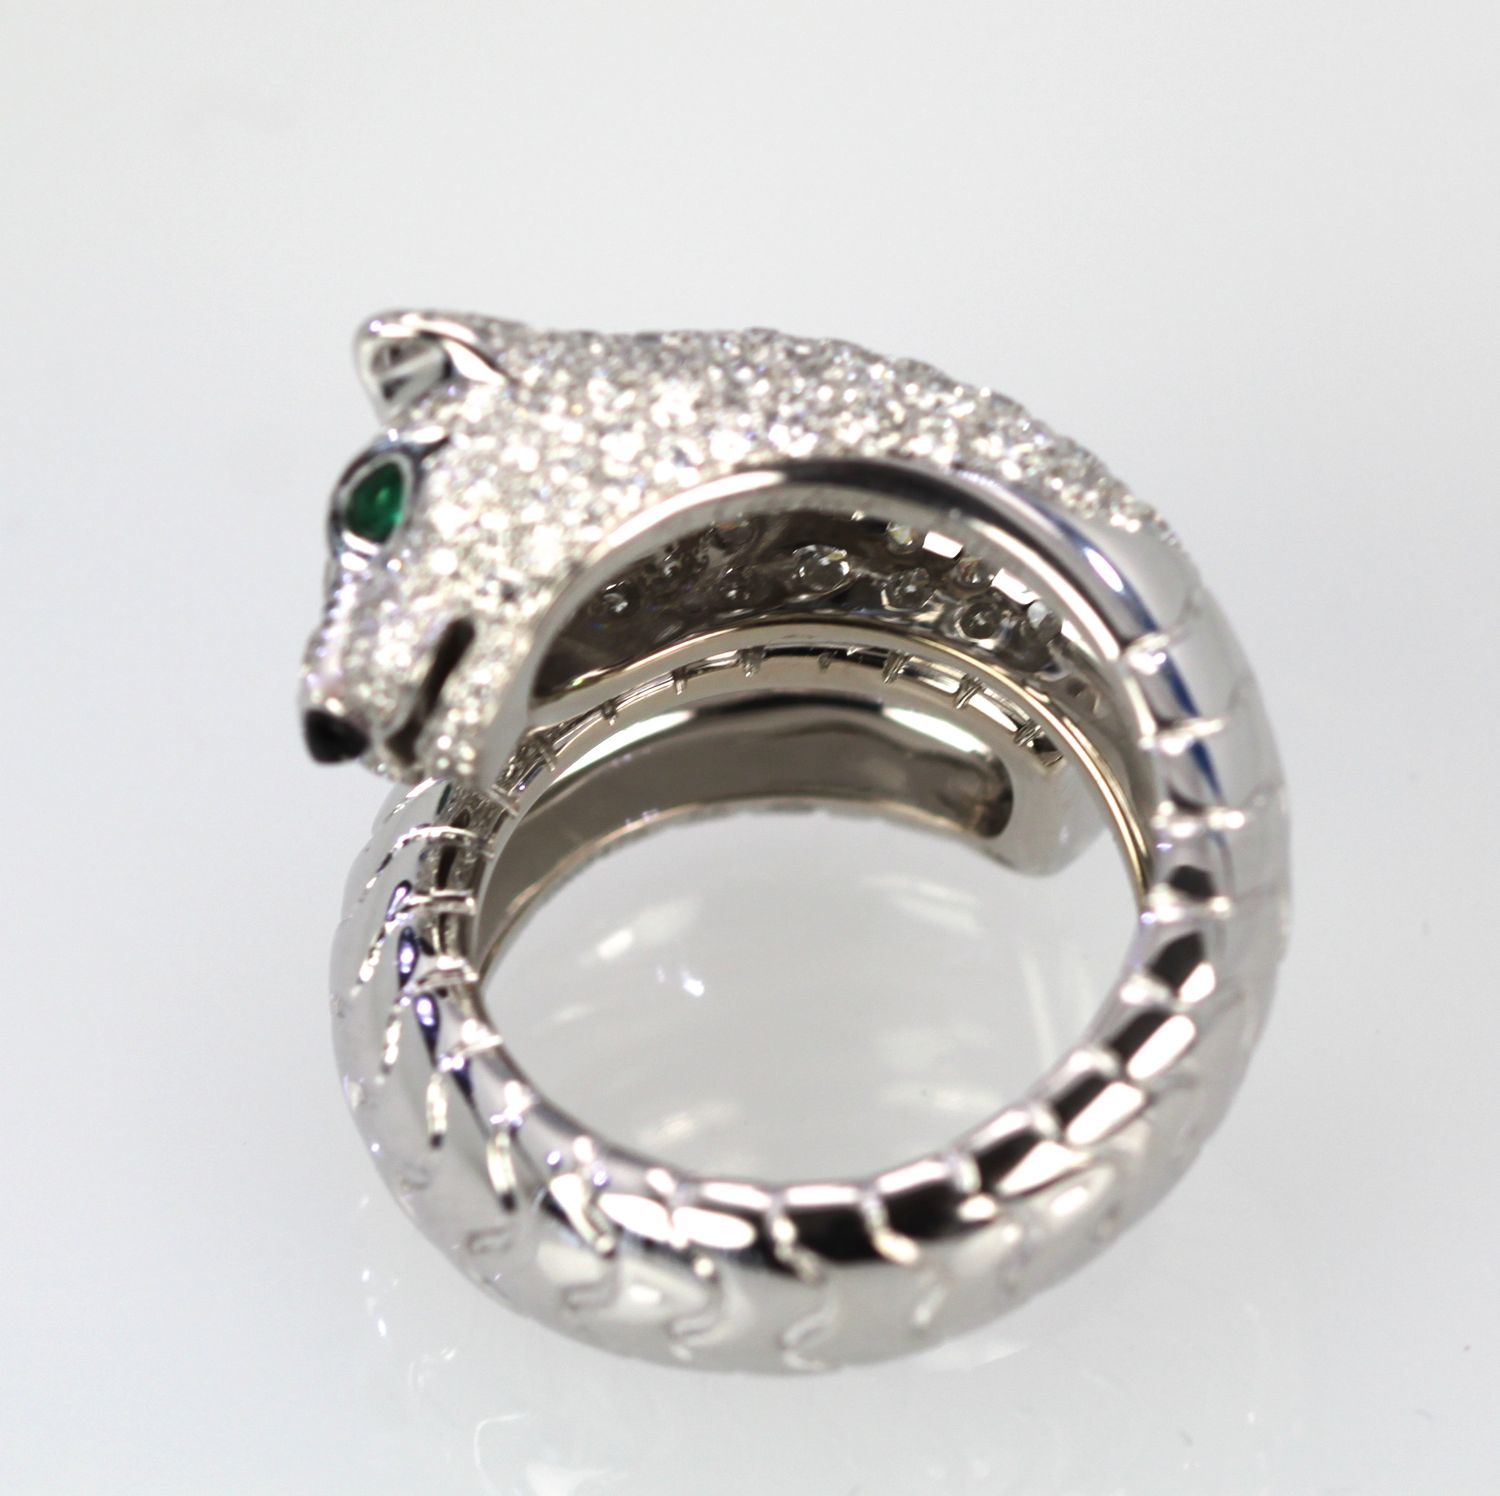 Cartier Panther Diamond Ring – Laying on side